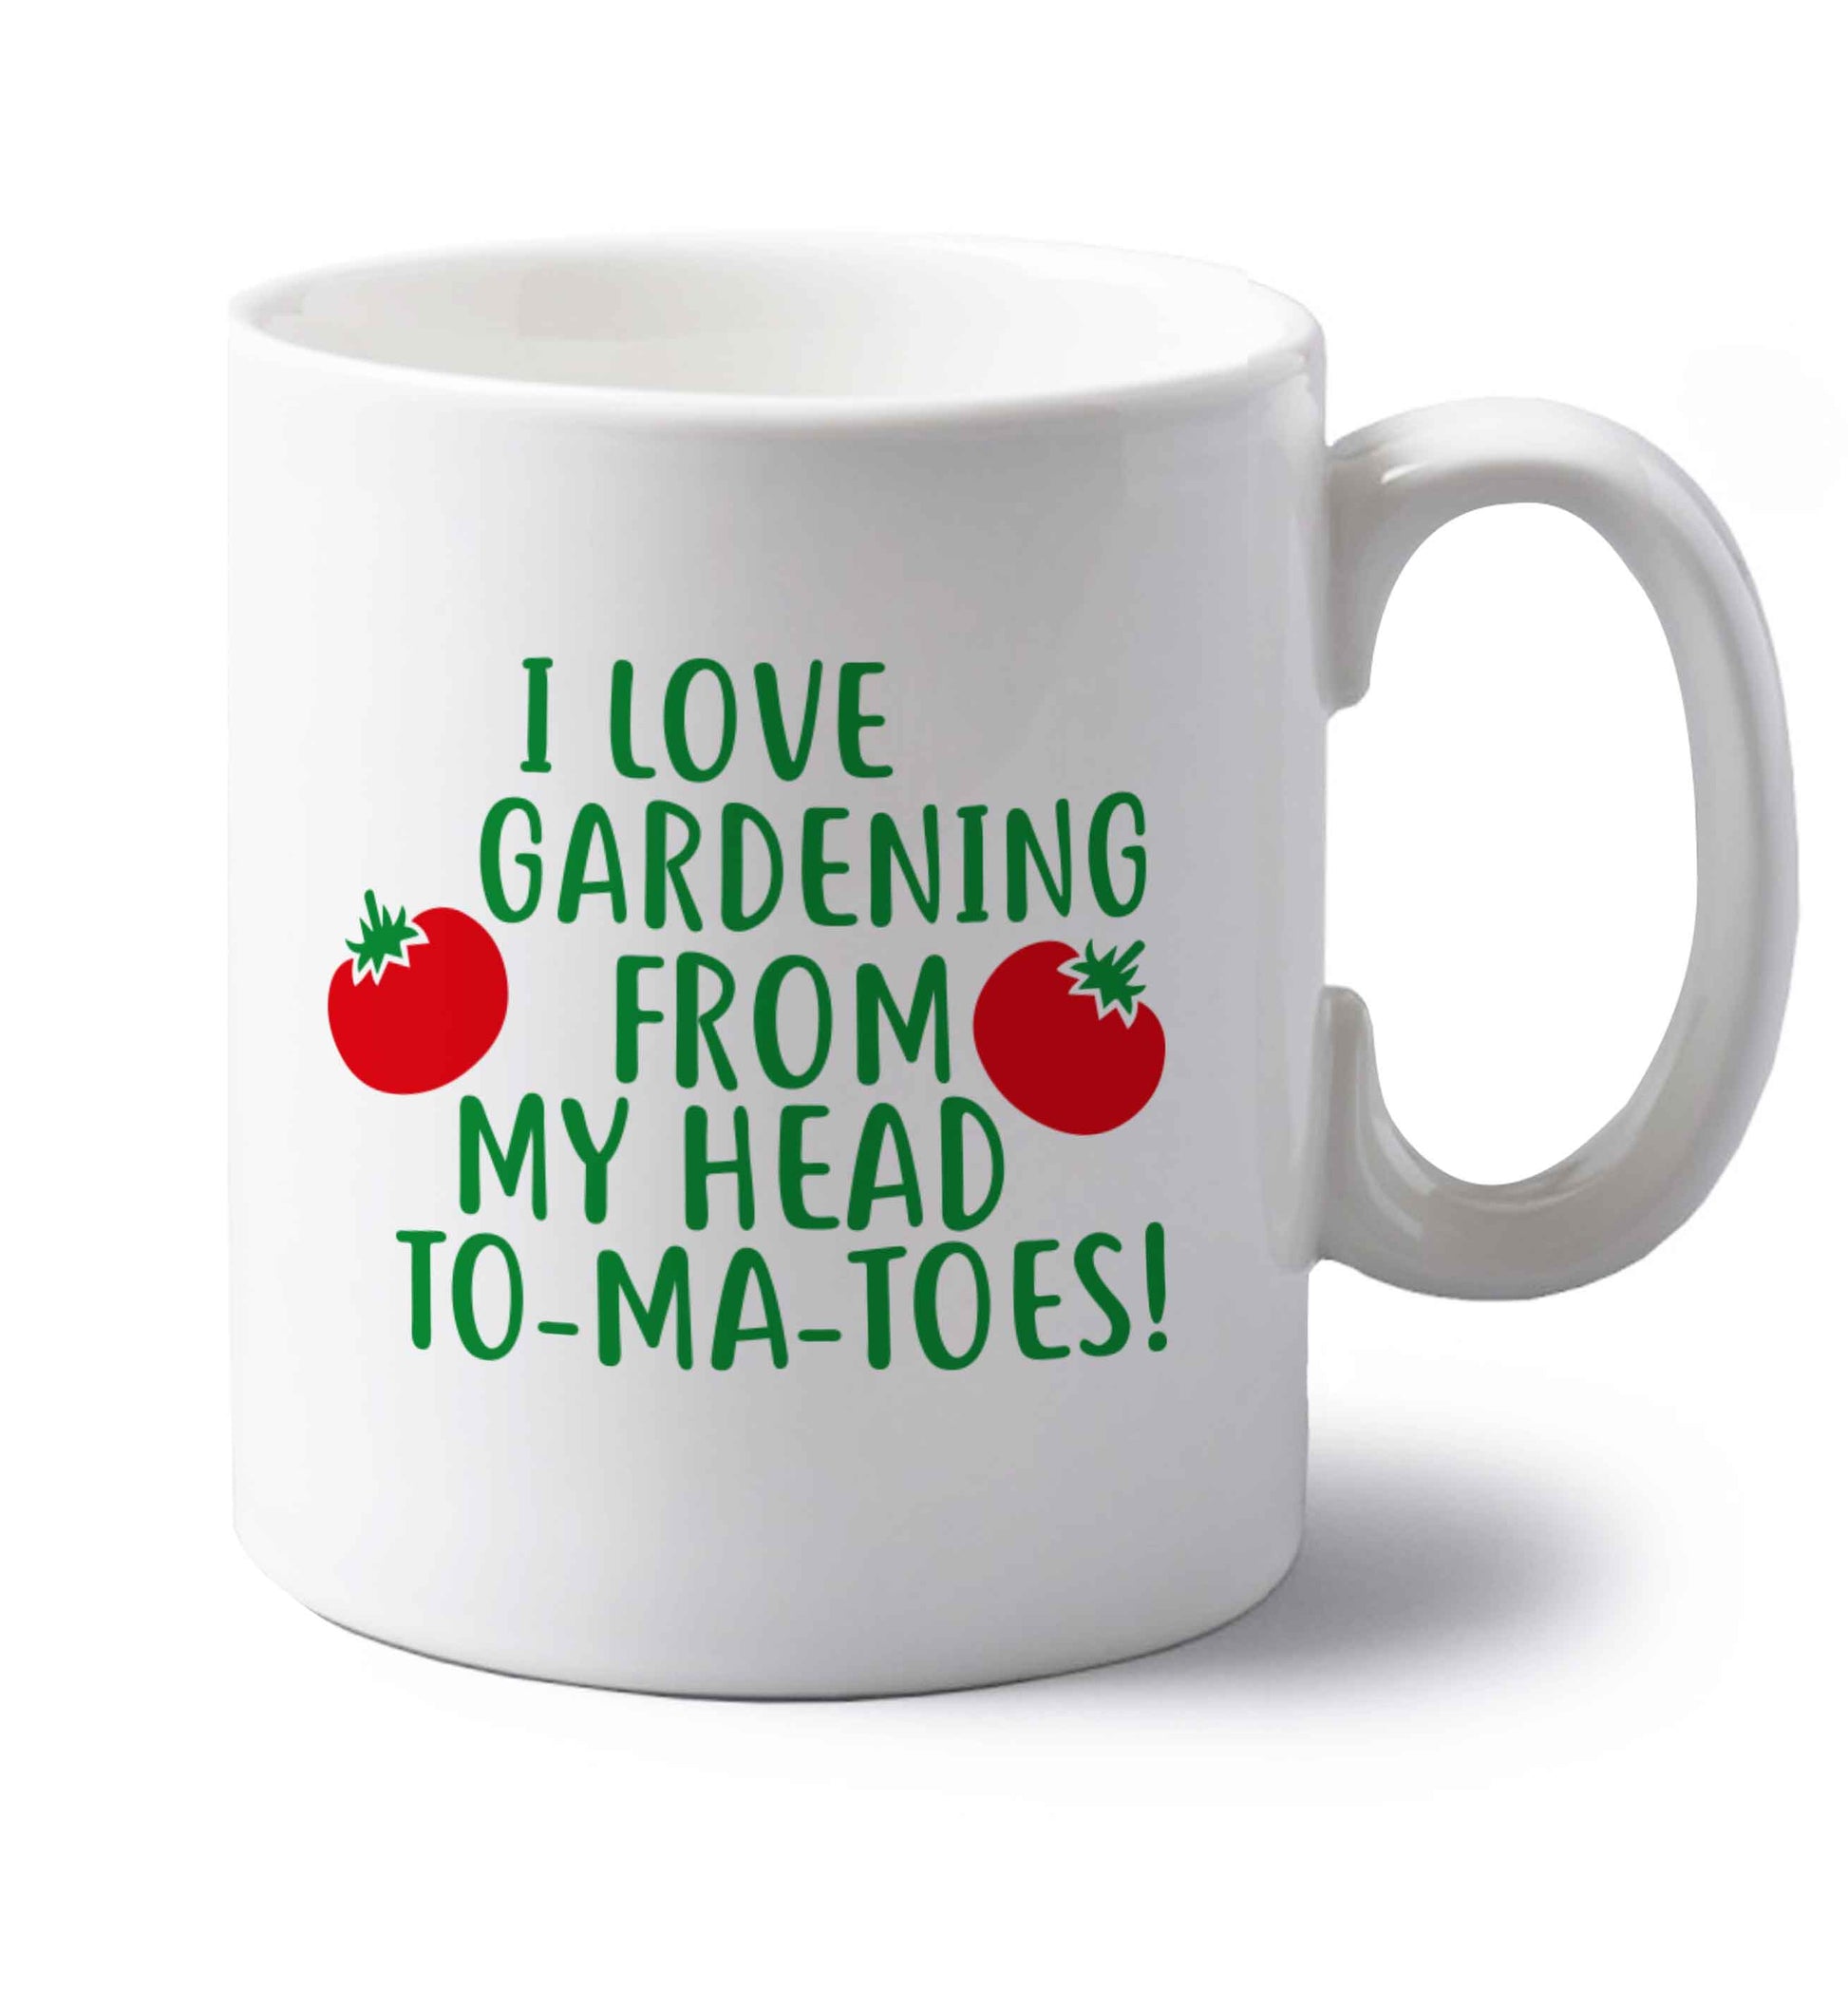 I love gardening from my head to-ma-toes left handed white ceramic mug 